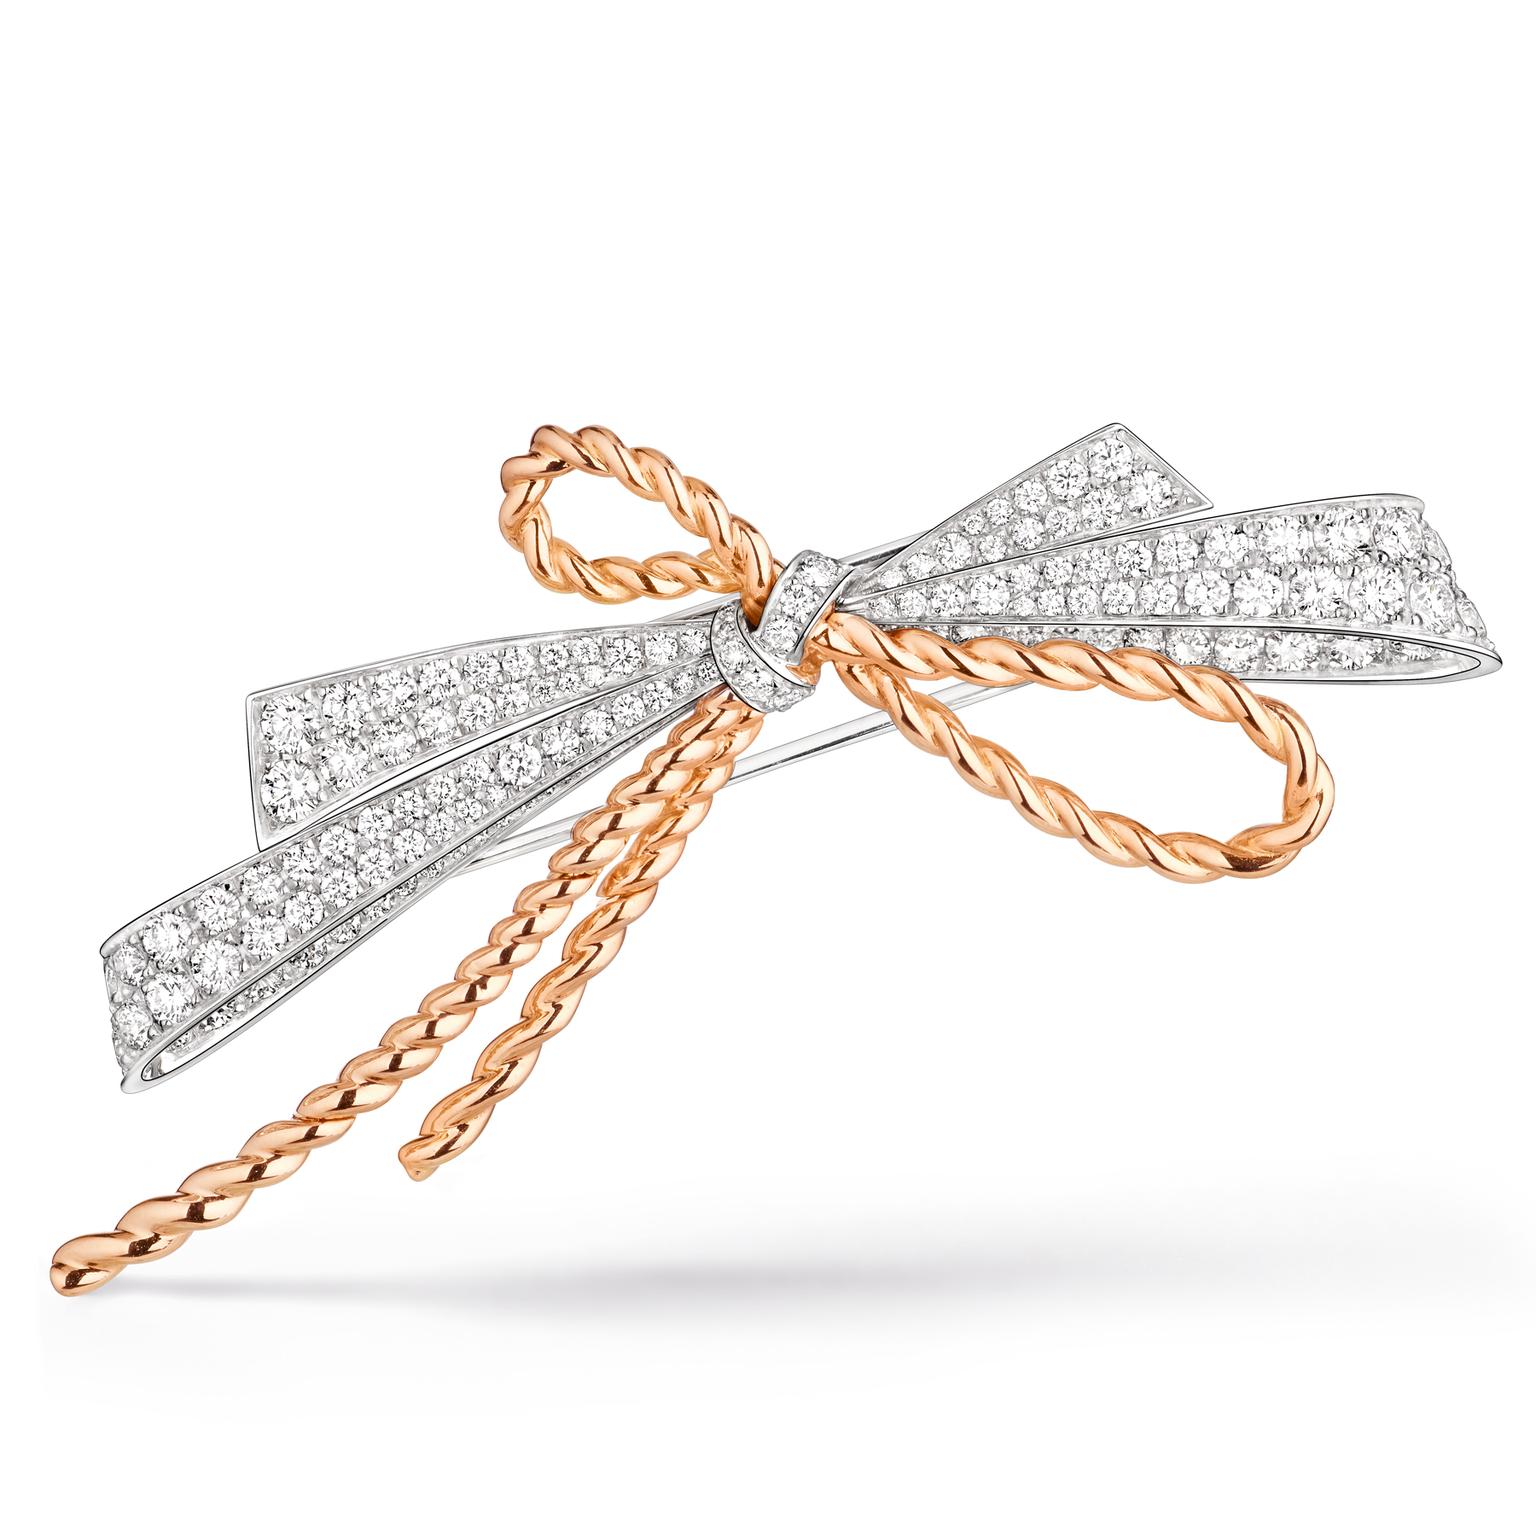 Chaumet Insolence bow brooch